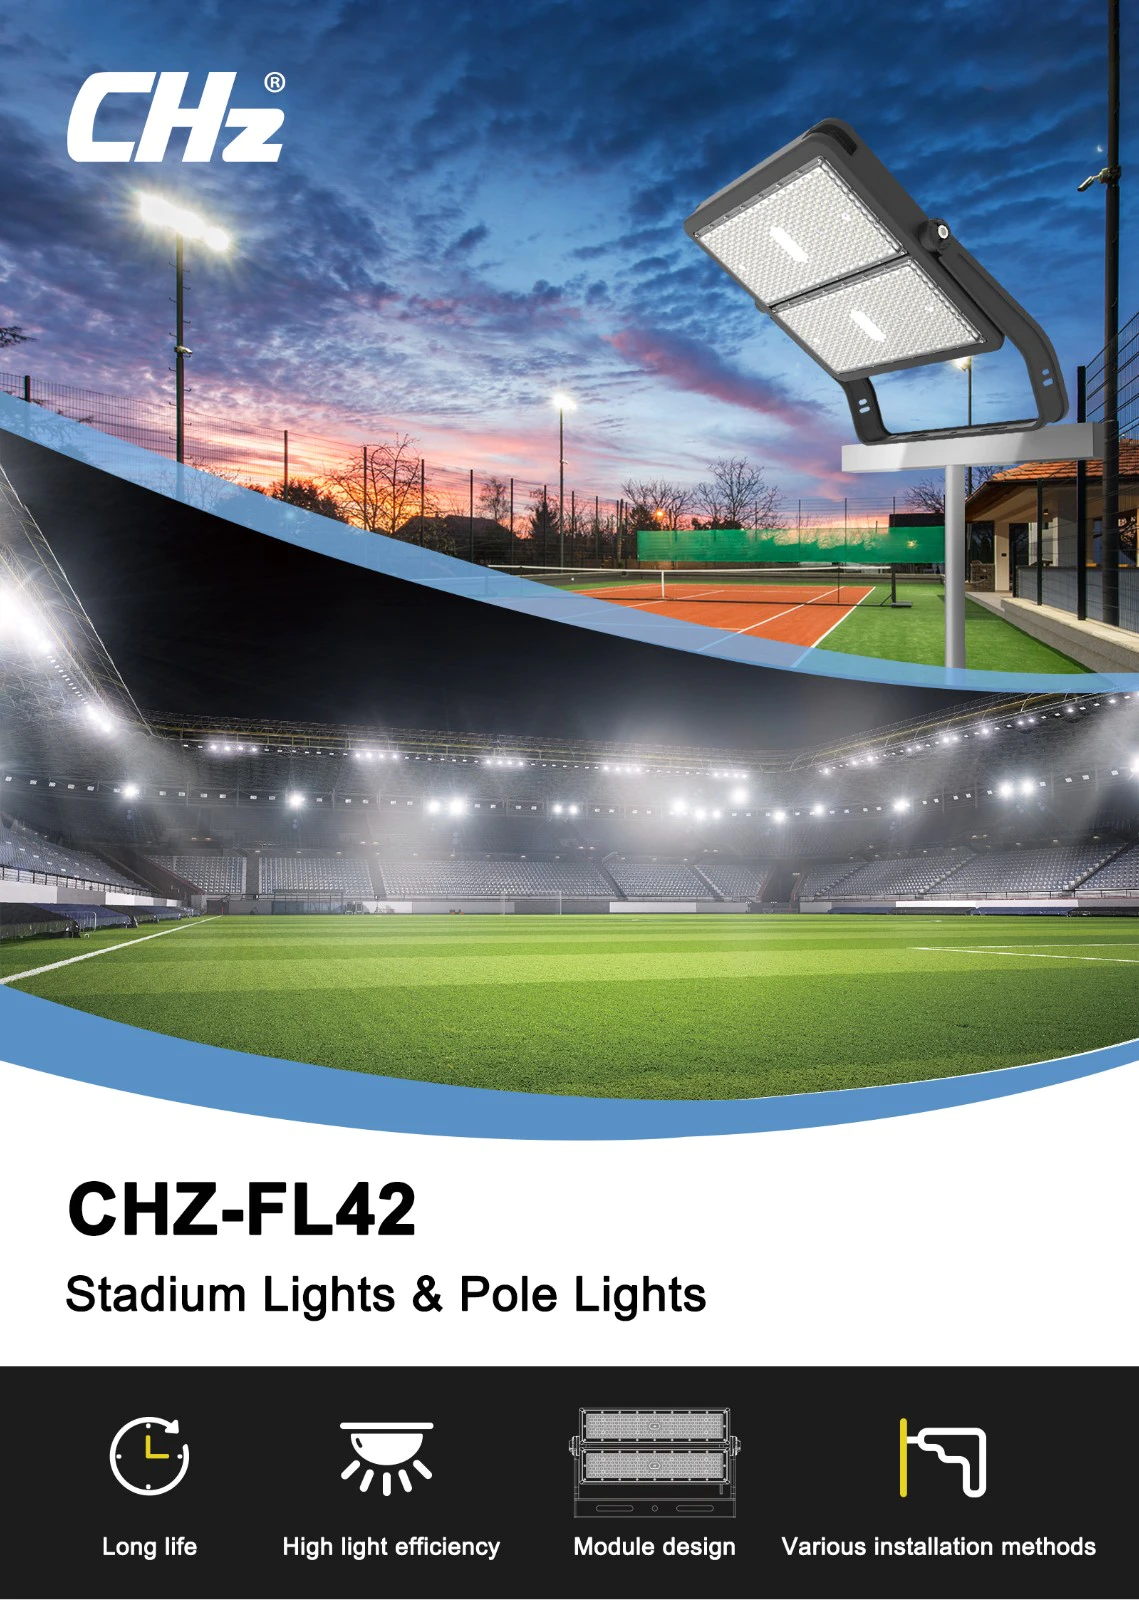 CHZ Lighting high quality led flood lights solution provider for outdoor sports arenas